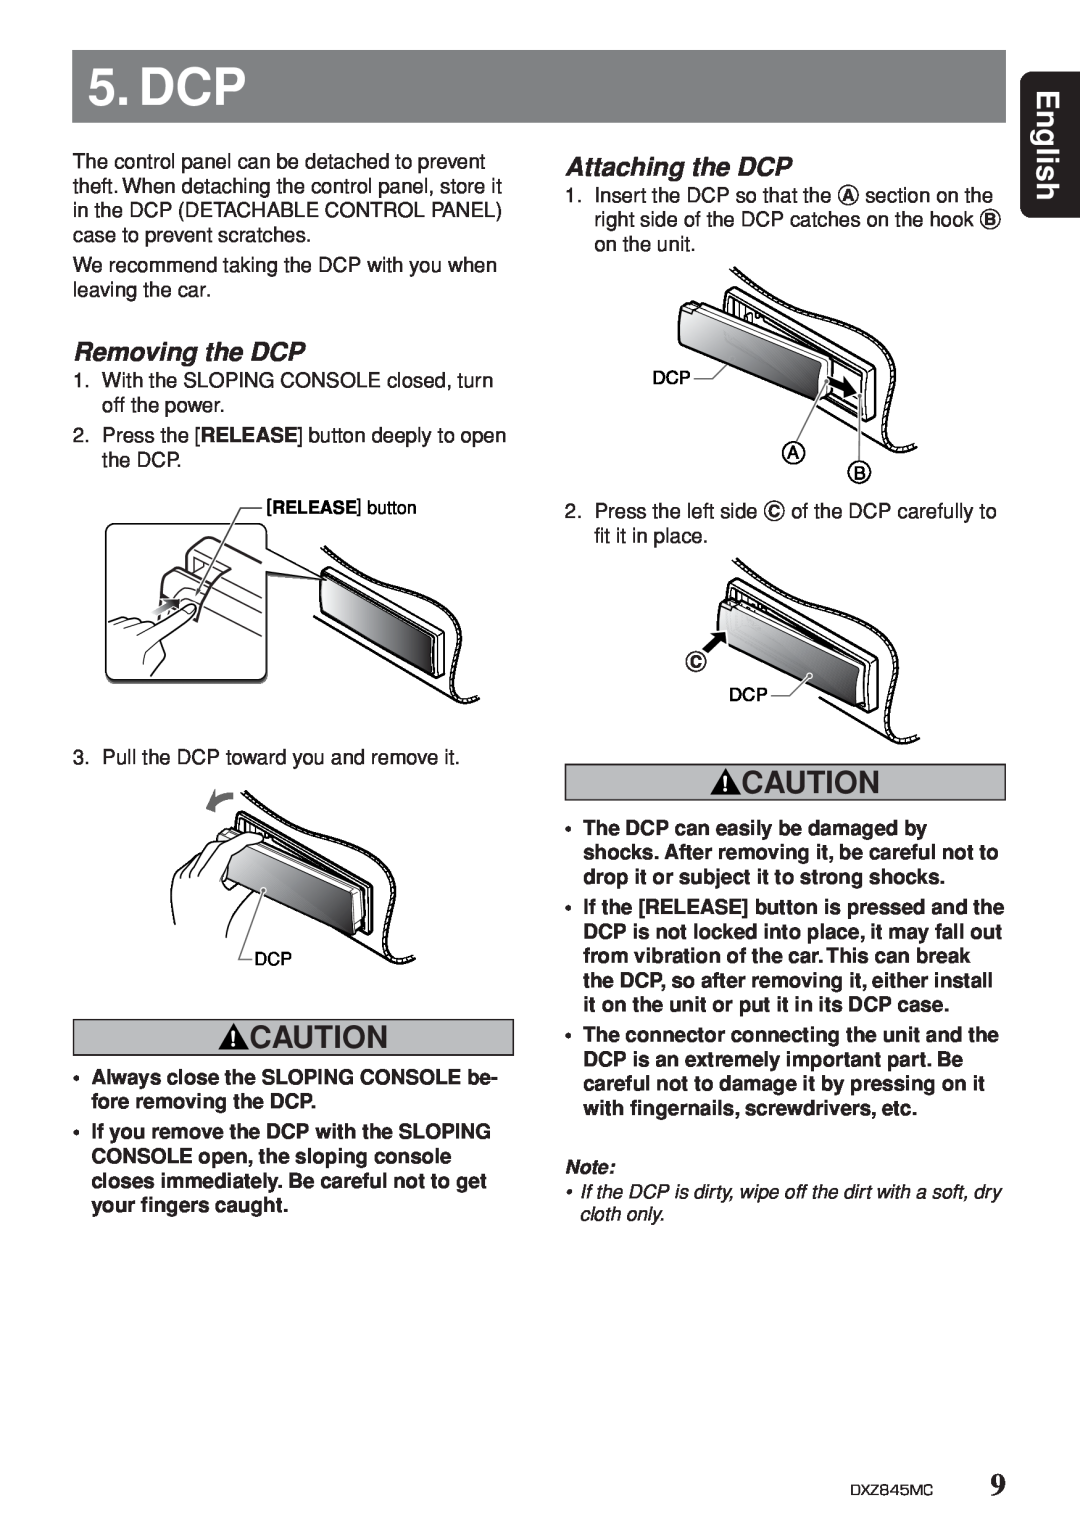 Clarion DXZ845MC owner manual Dcp, Removing the DCP, Attaching the DCP, English 